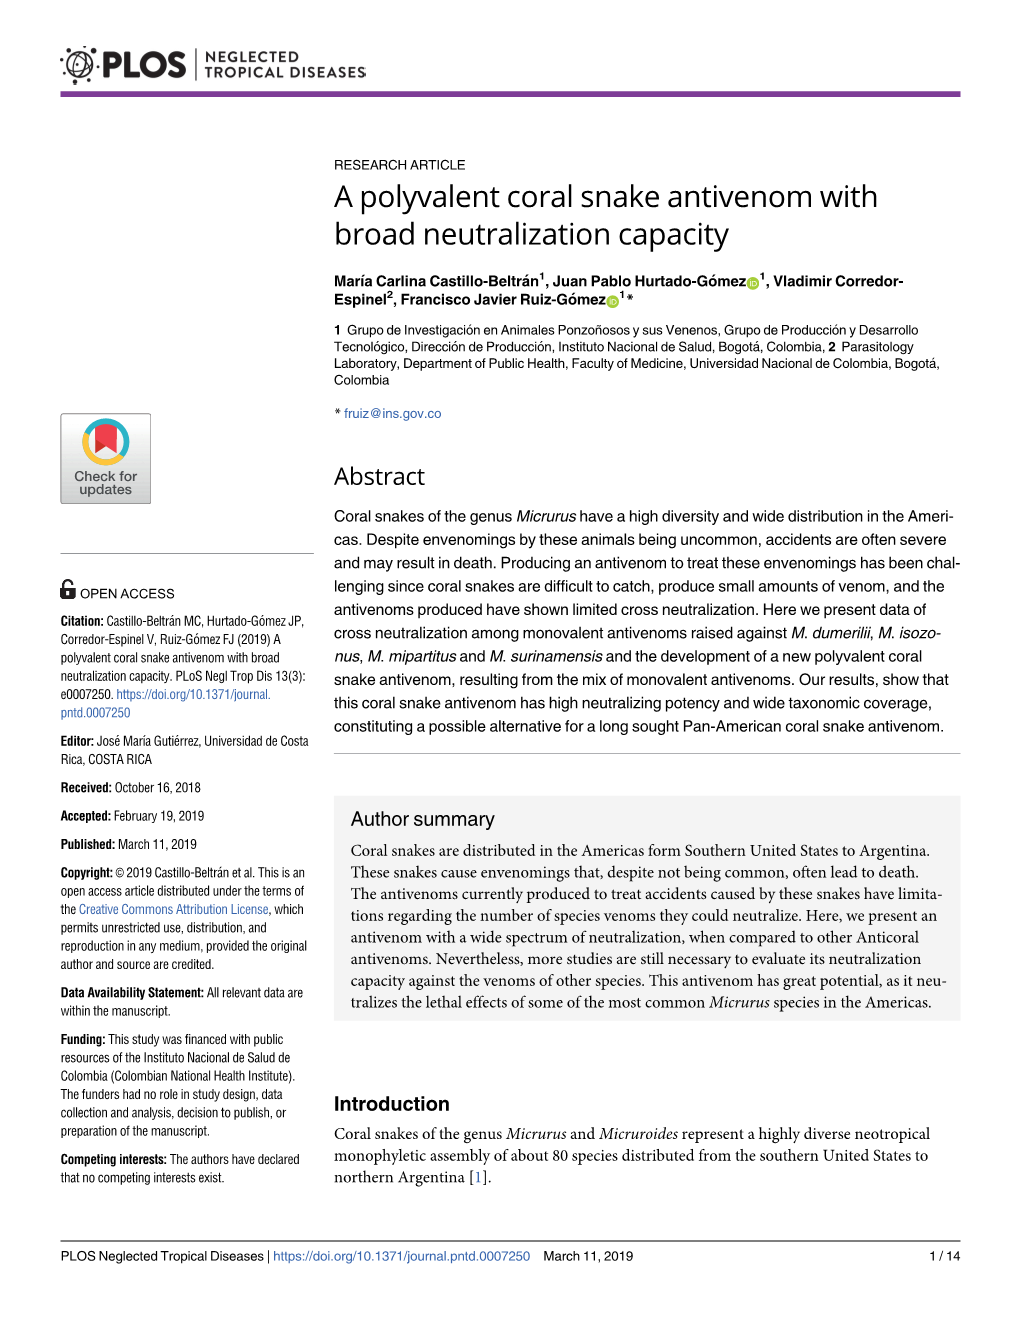 A Polyvalent Coral Snake Antivenom with Broad Neutralization Capacity